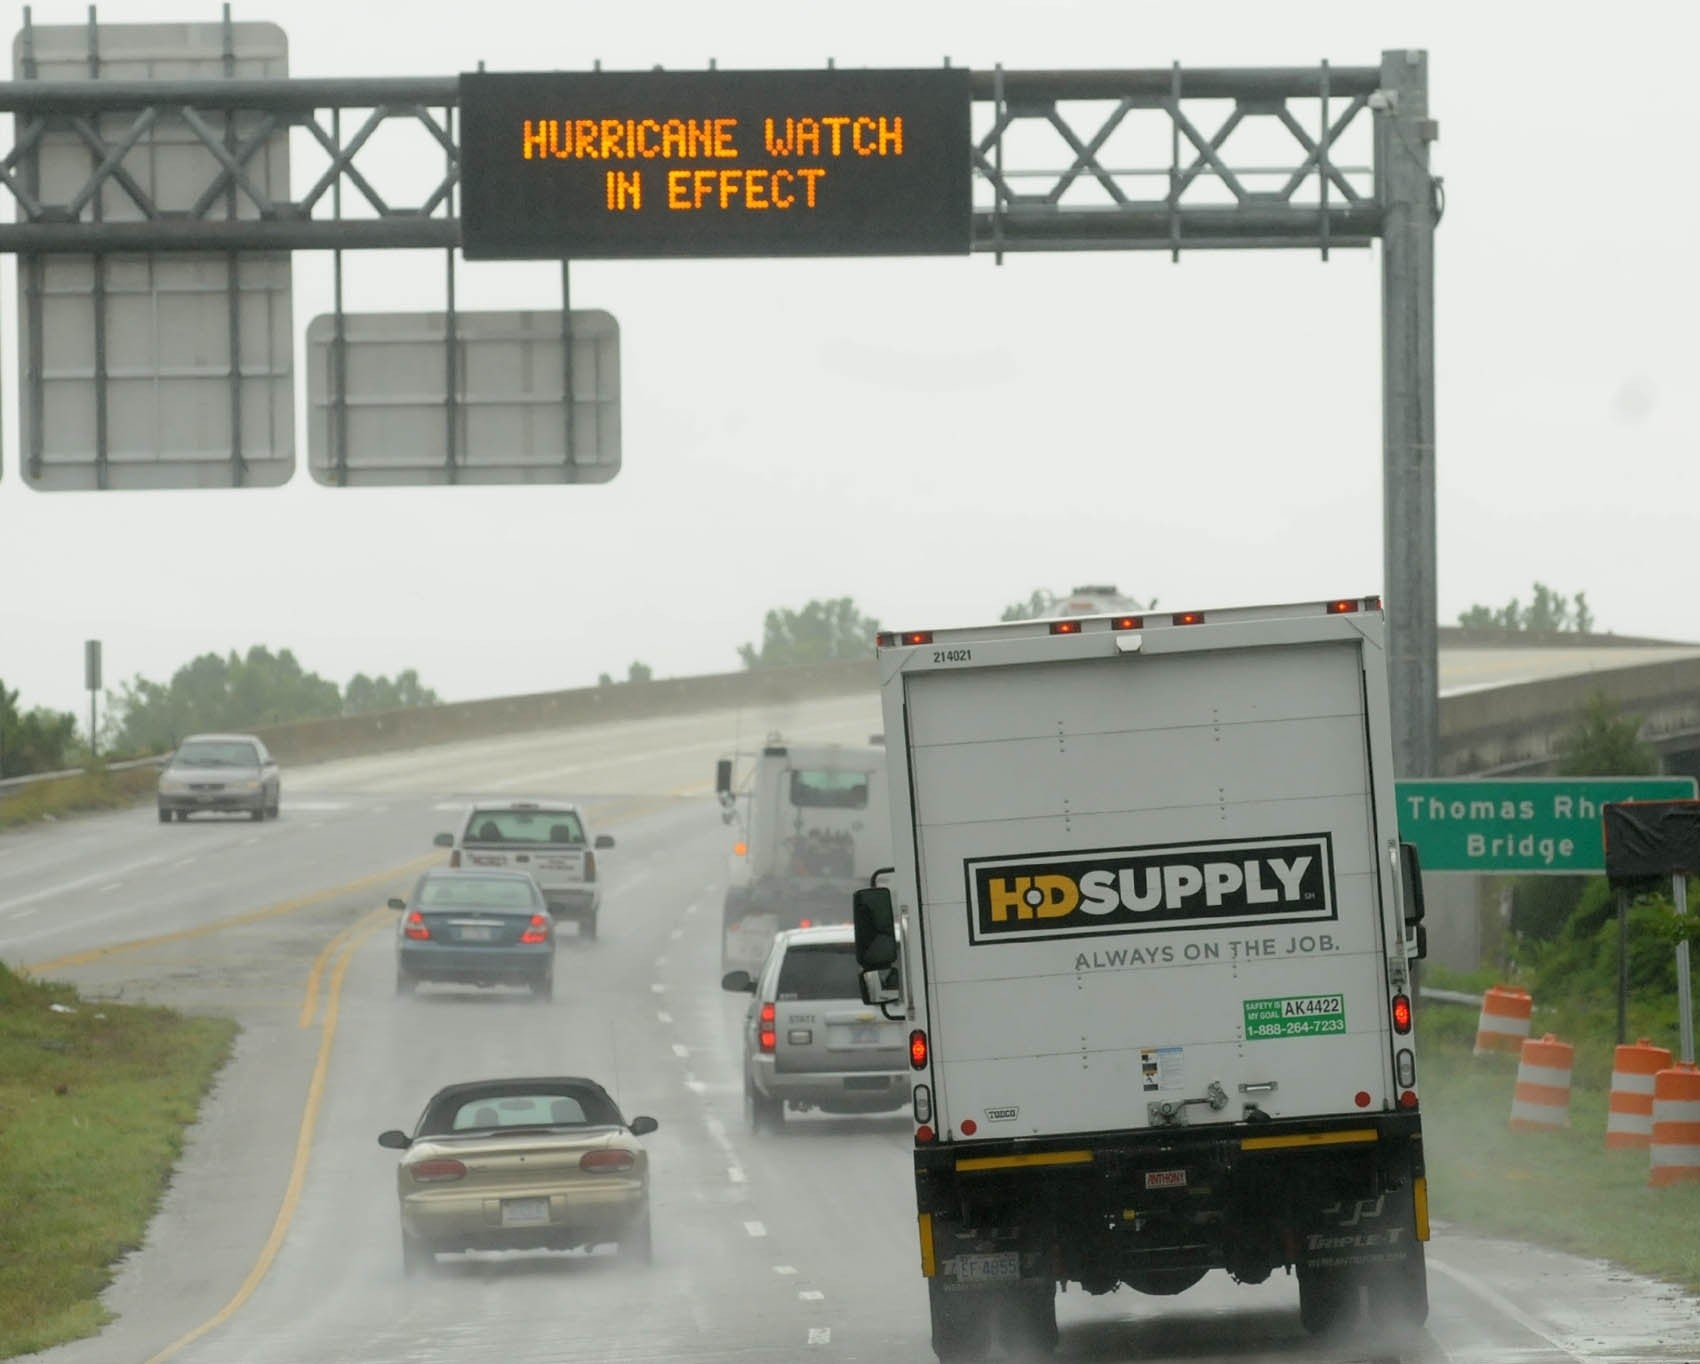 Vehicles travel across the Thomas Rhodes Bridge as rain falls in Wilmington, N.C. Residents along the coast of North Carolina are bracing for the arrival of the Hurricane Arthur, a category one storm